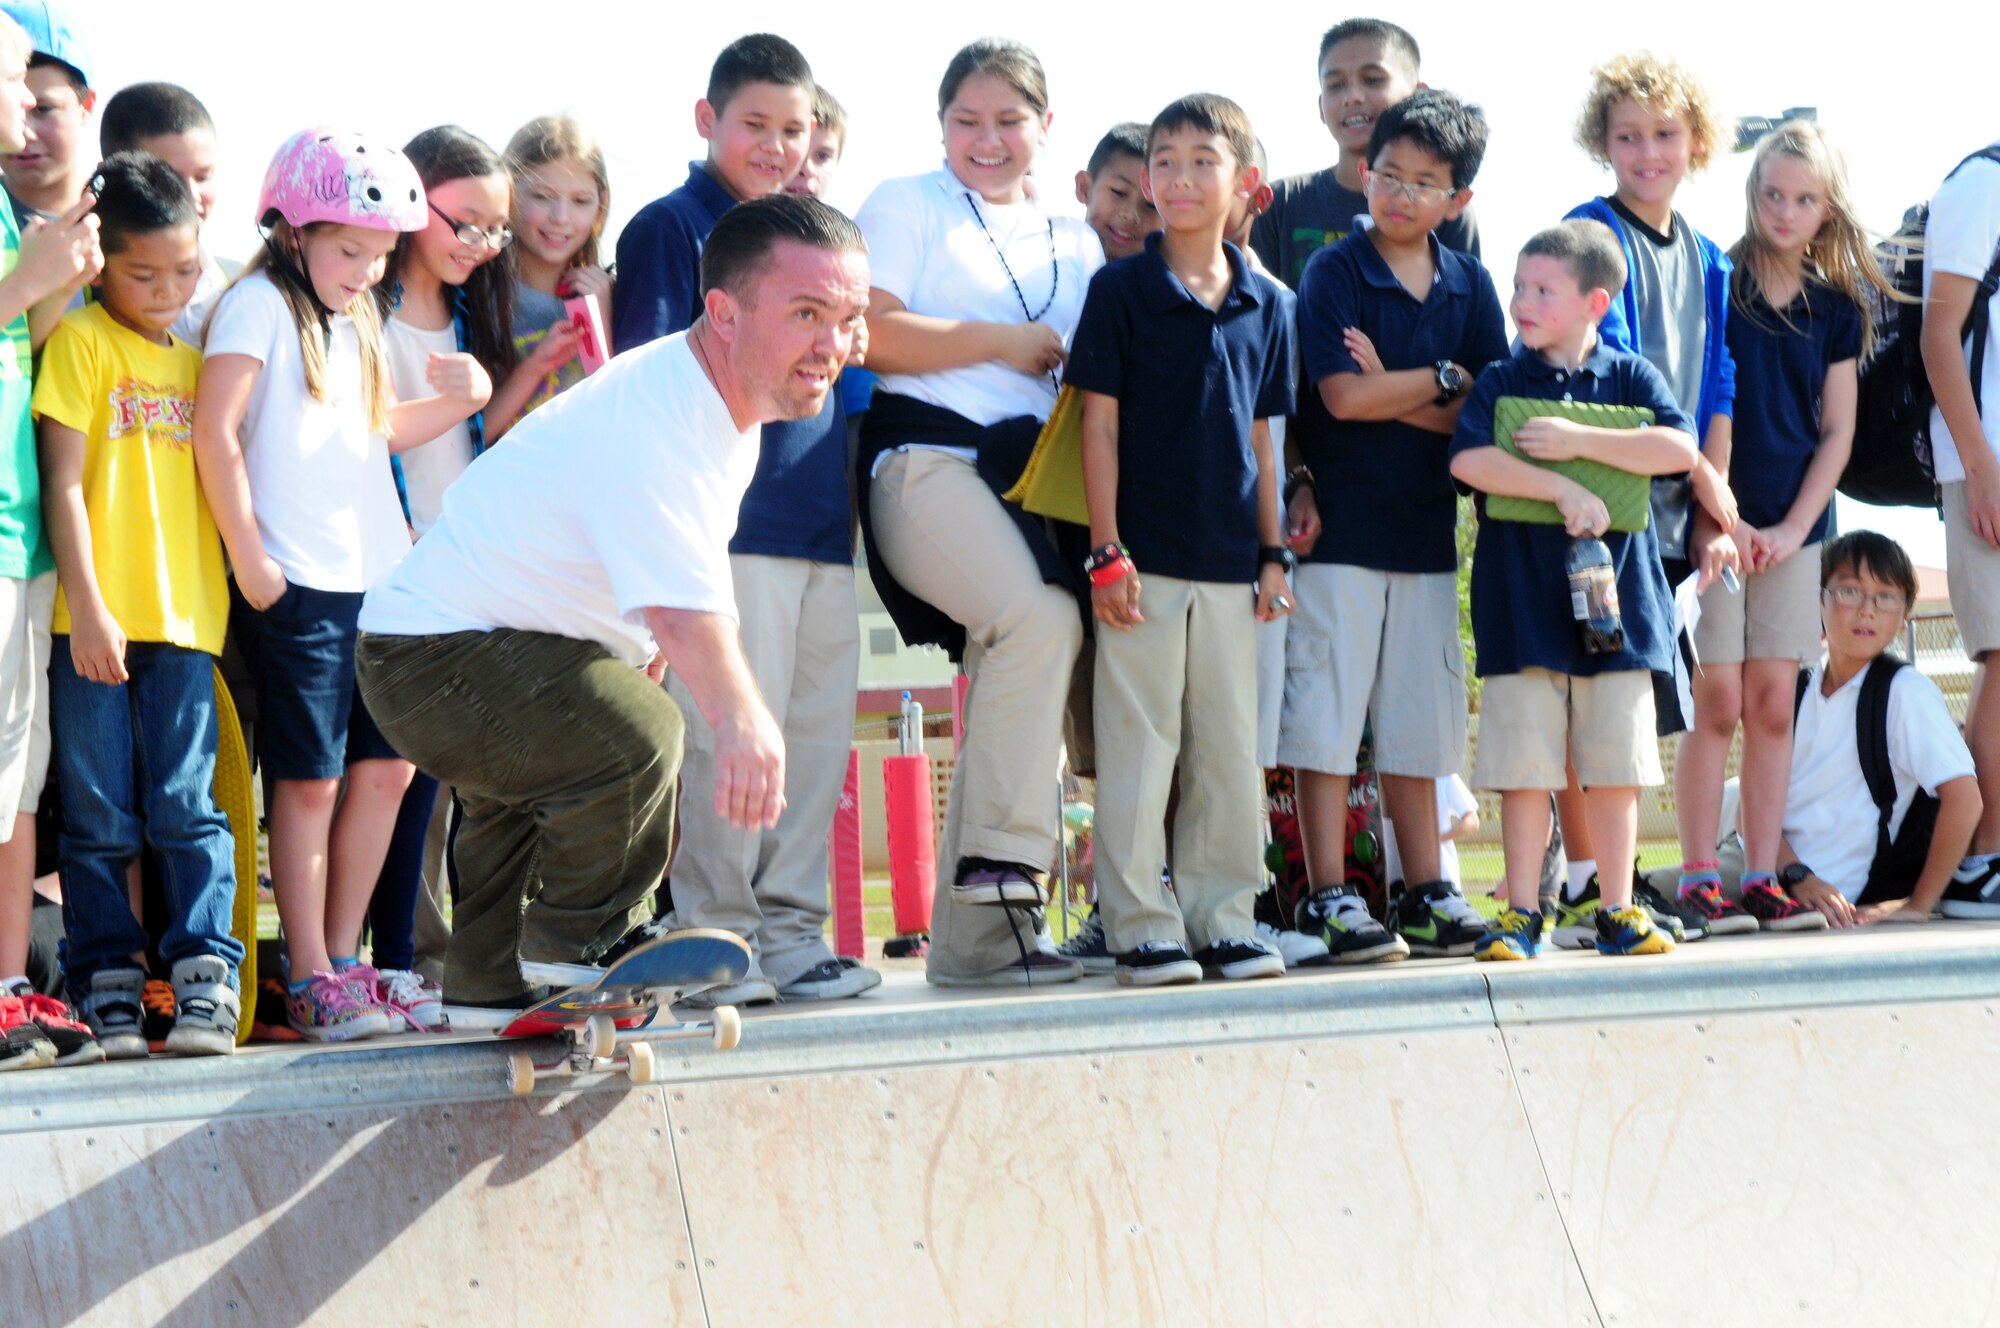 Actor Jason “Wee Man” Acuña performs a trick on the half pipe, as Team Andersen youth cheer him on at the skate park on Andersen Air Force Base, Guam, Jan. 9. Wee Man signed autographs, raffled prizes, conducted a skateboard demonstration and previewed his newest movie for Airmen and family members at Andersen as part of his Wee Man Salutes the Service tour. (U.S. Air Force photo by Senior Airman Robert Hicks/Released)